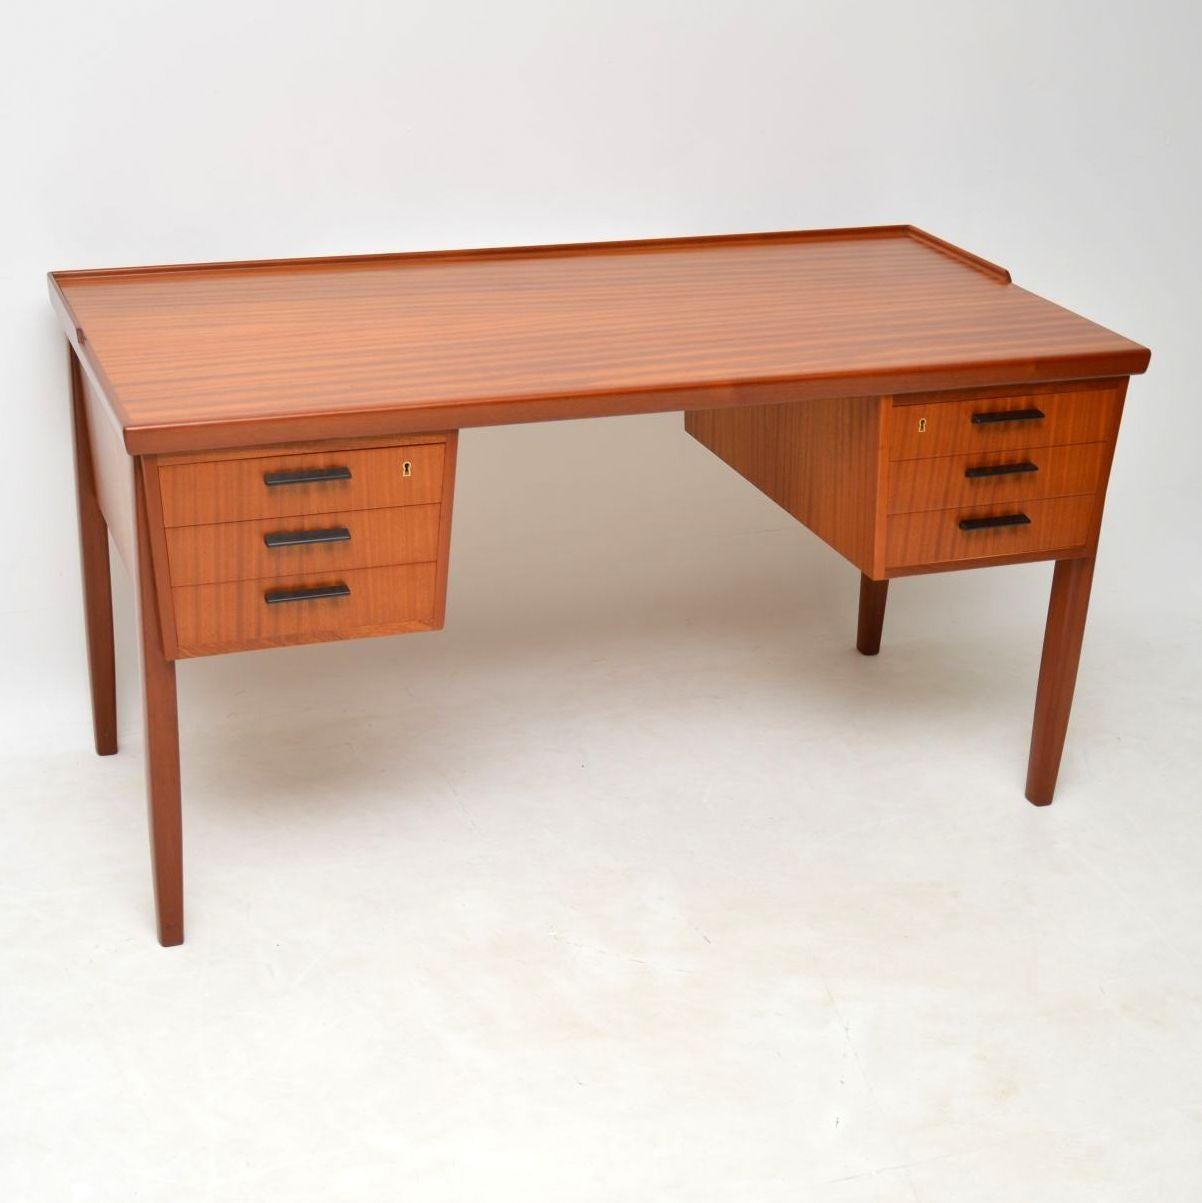 A beautifully designed desk, this was made in Denmark in the 1960s. The wood is beautiful but it’s to tell exactly what it is, it looks a bit like teak, but could also be a type of satin mahogany. Either way the grain patterns are lovely, the design